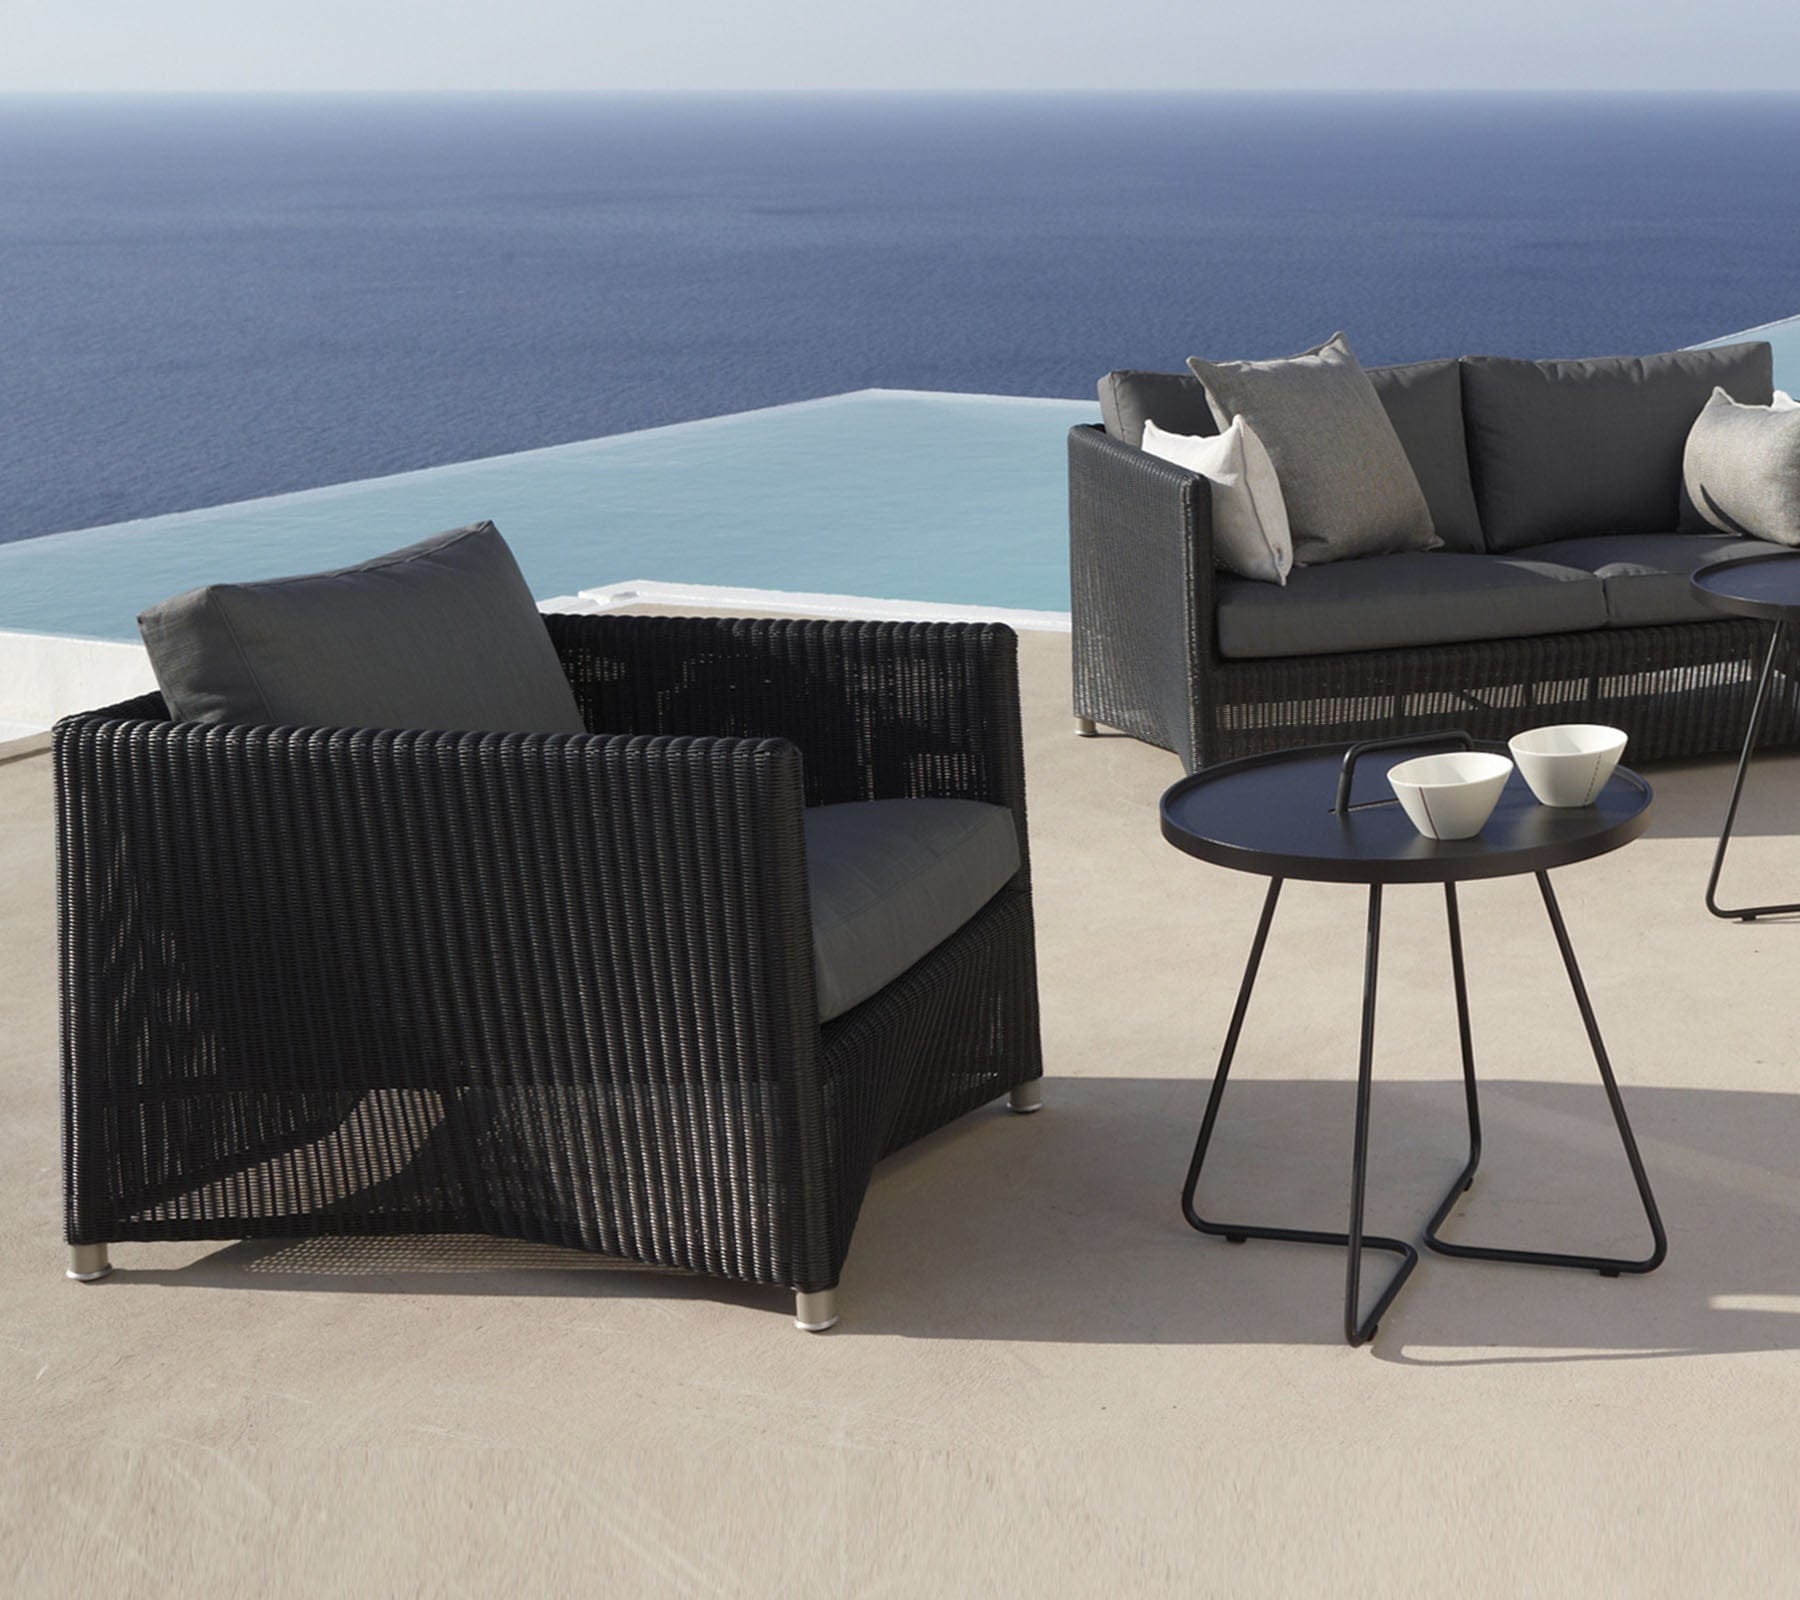 Boxhill's Diamond Weave Lounge Chair lifestyle image with Diamond 2-Seater Weave Sofa and side table beside the pool